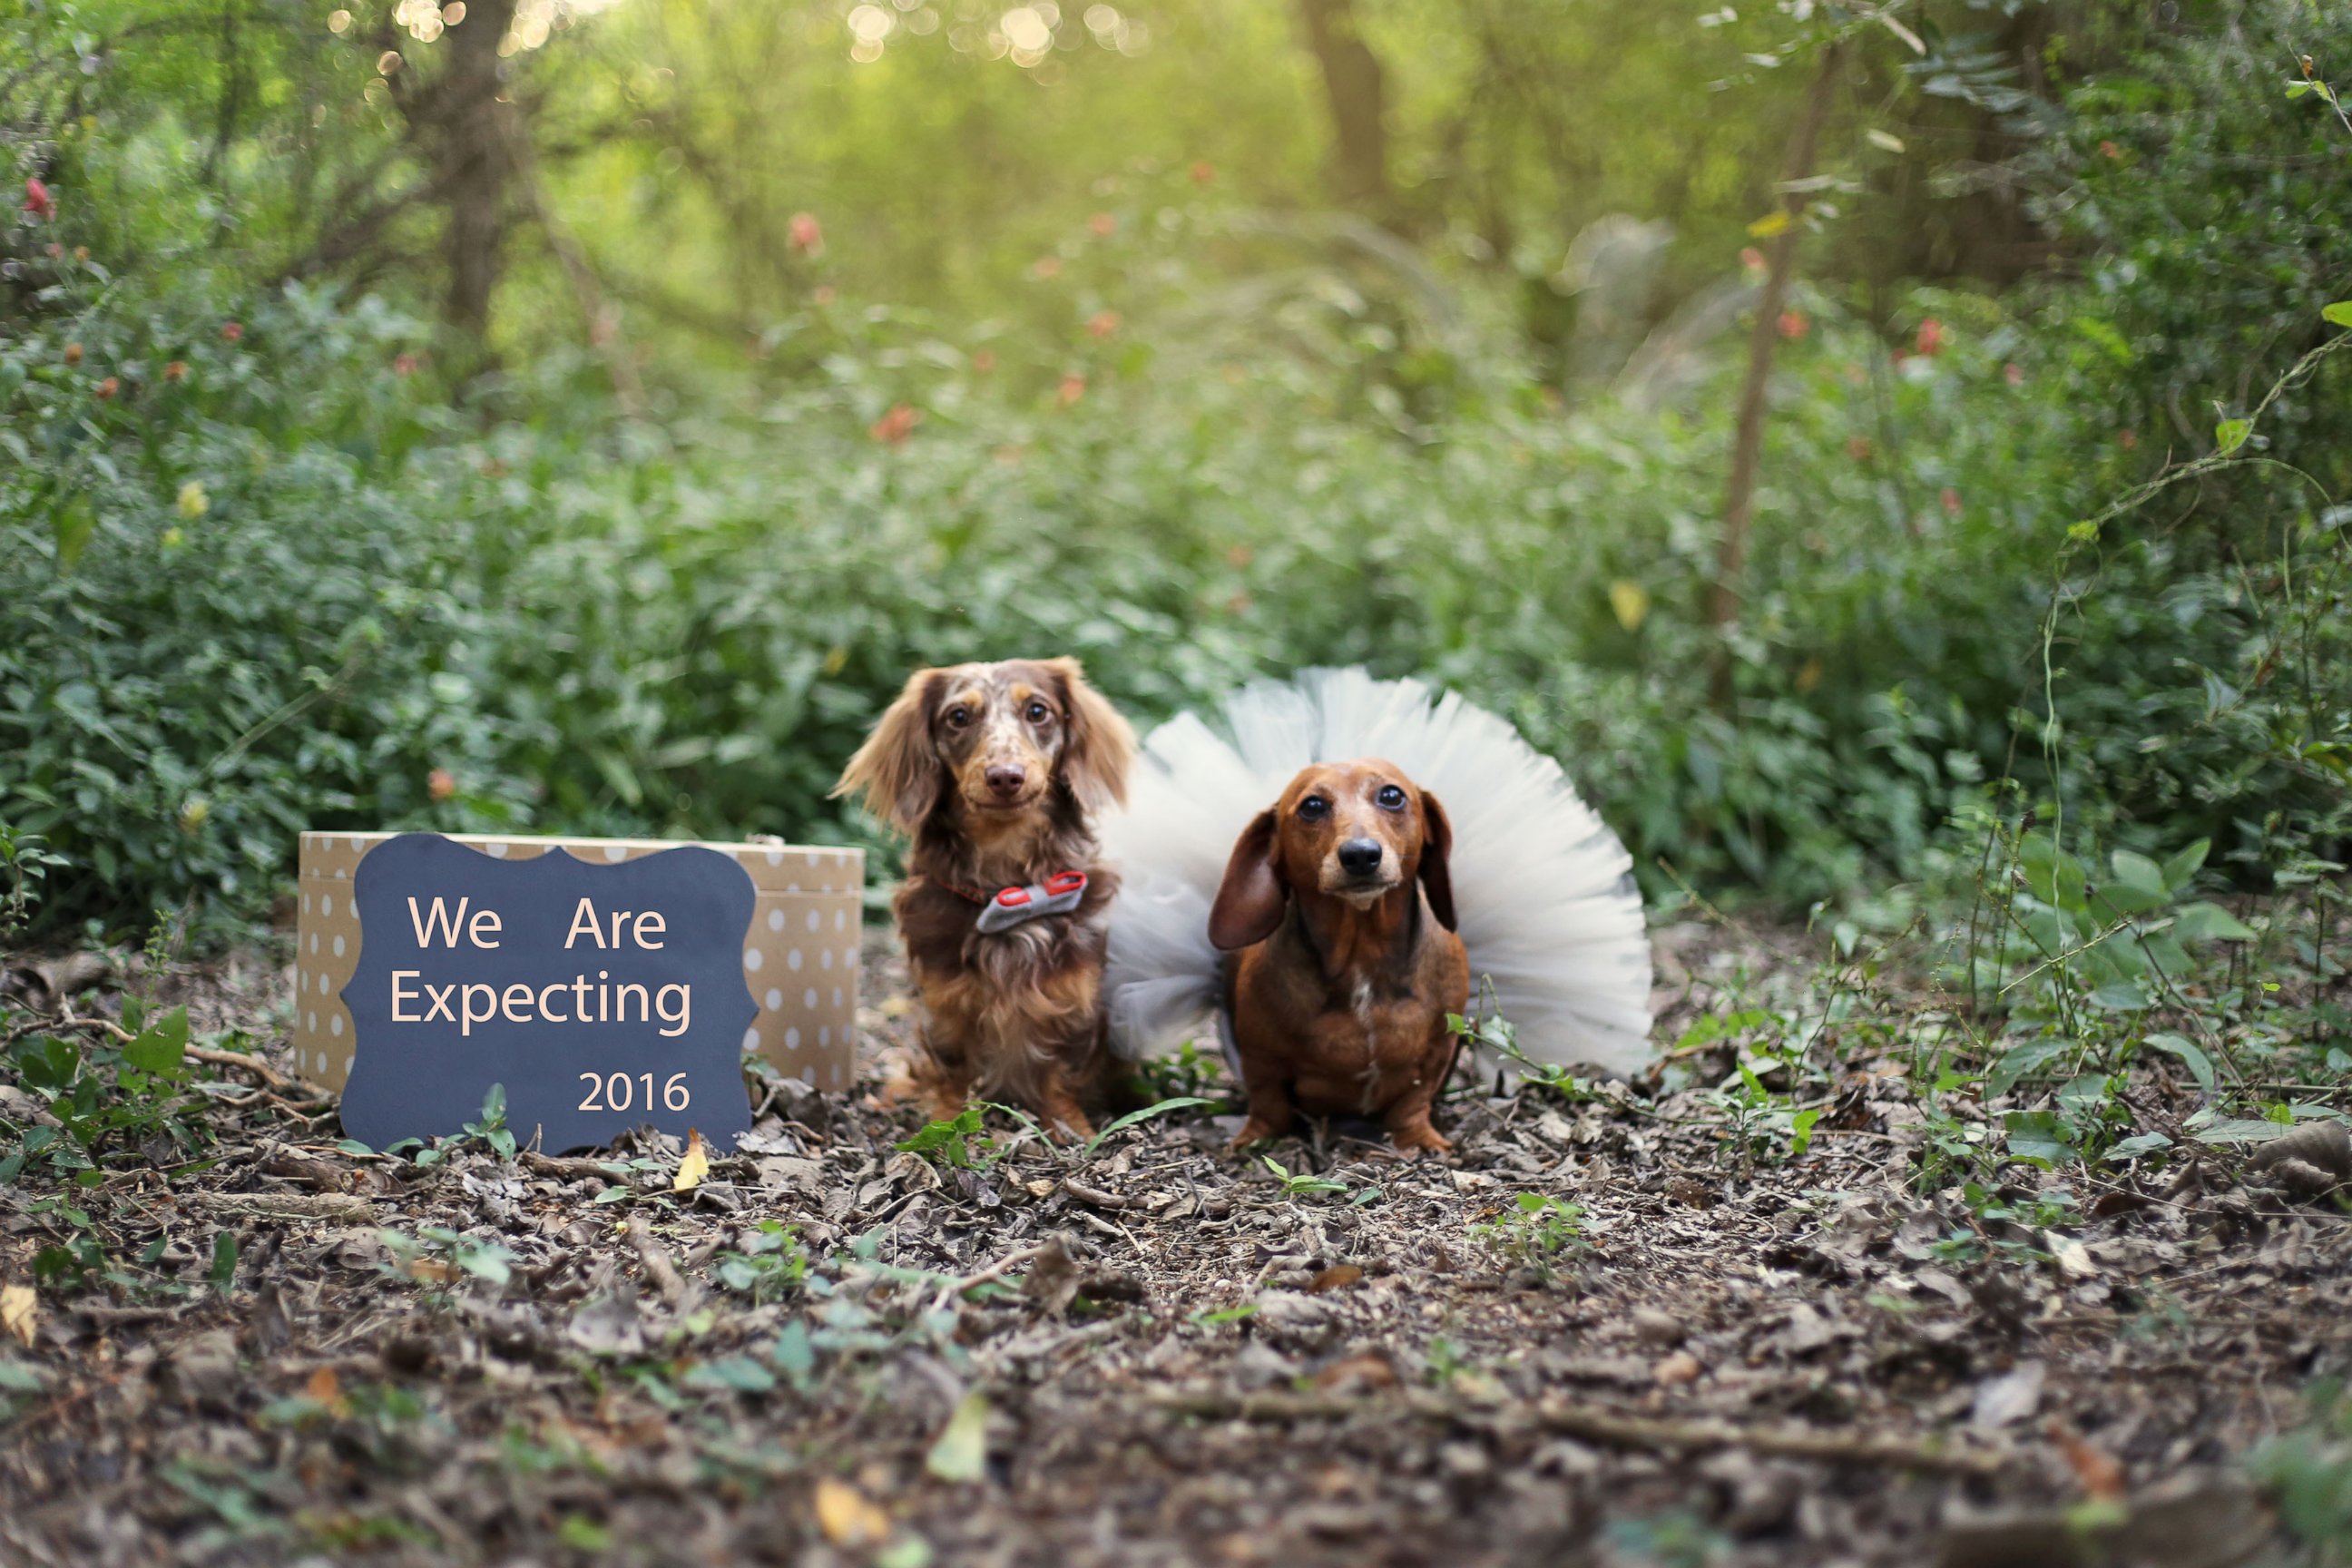 PHOTO: A newborn photographer has swapped babies for puppies for a unique photo shoot. Belinda Joy Schenk photographed Dachshund parents and their 6 puppies.  